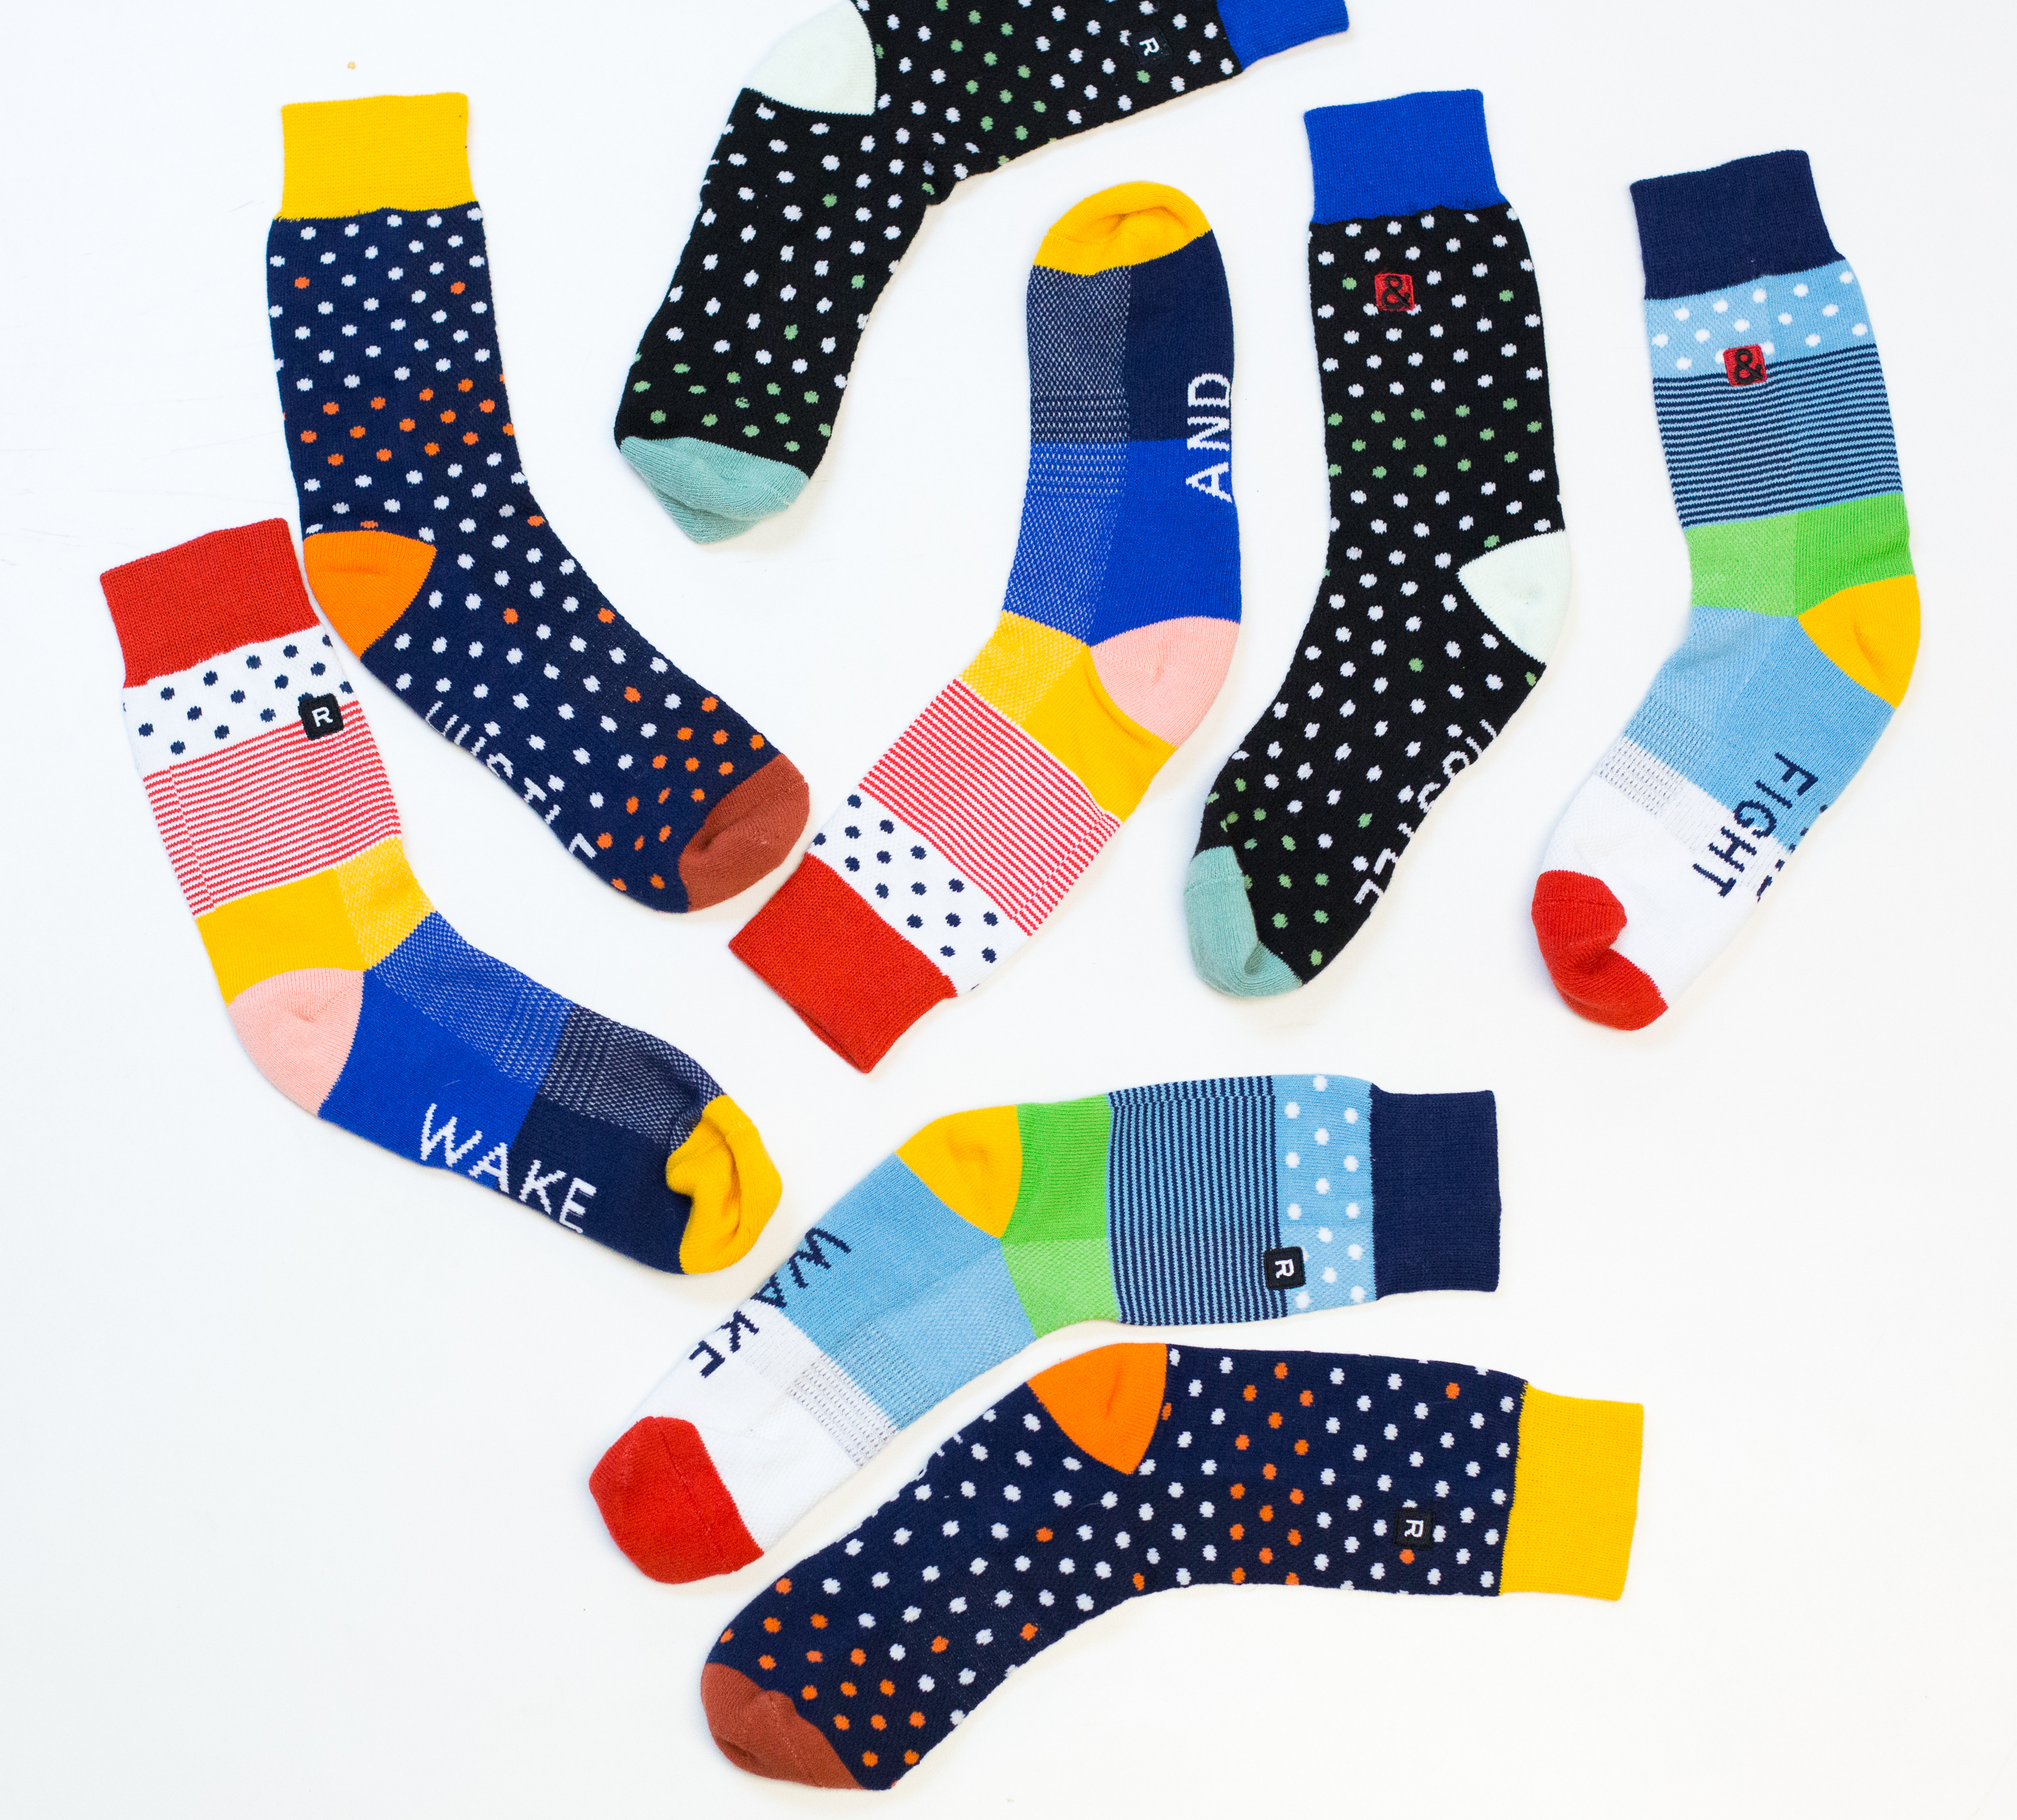 These Socks Are Made Specifically For Chefs